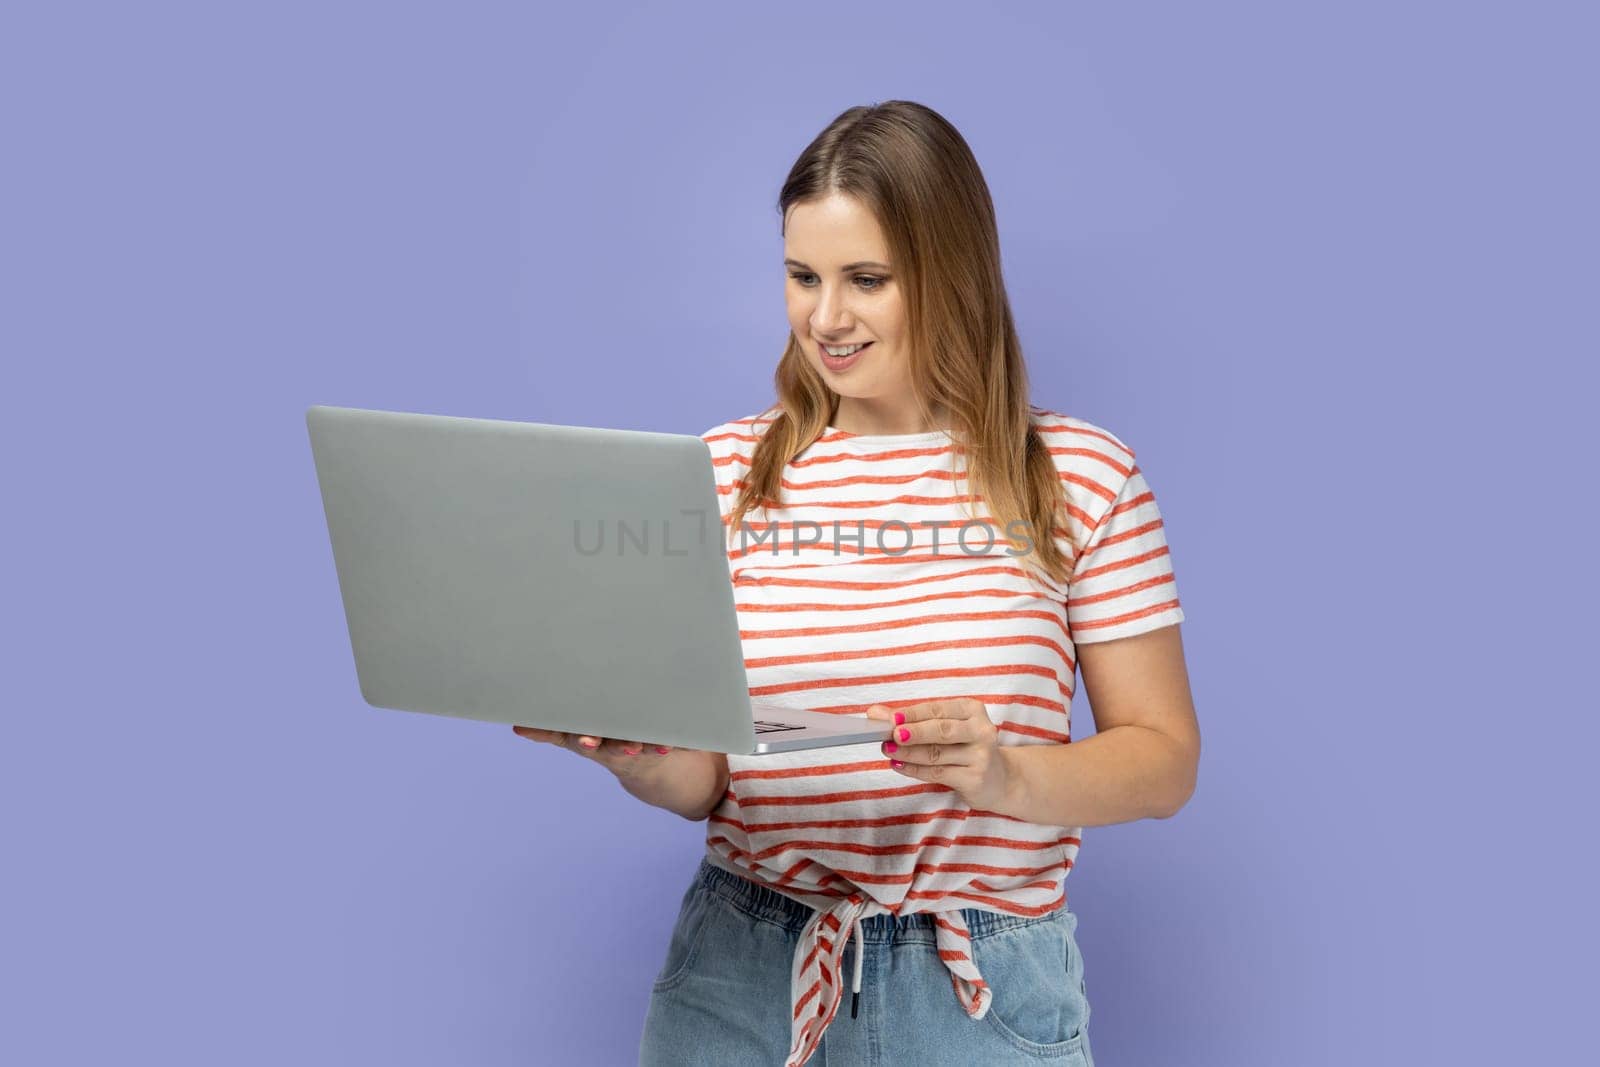 Portrait of smiling positive blond woman wearing striped T-shirt working on laptop, looking at display, enjoying her online work, reading information. Indoor studio shot isolated on purple background.